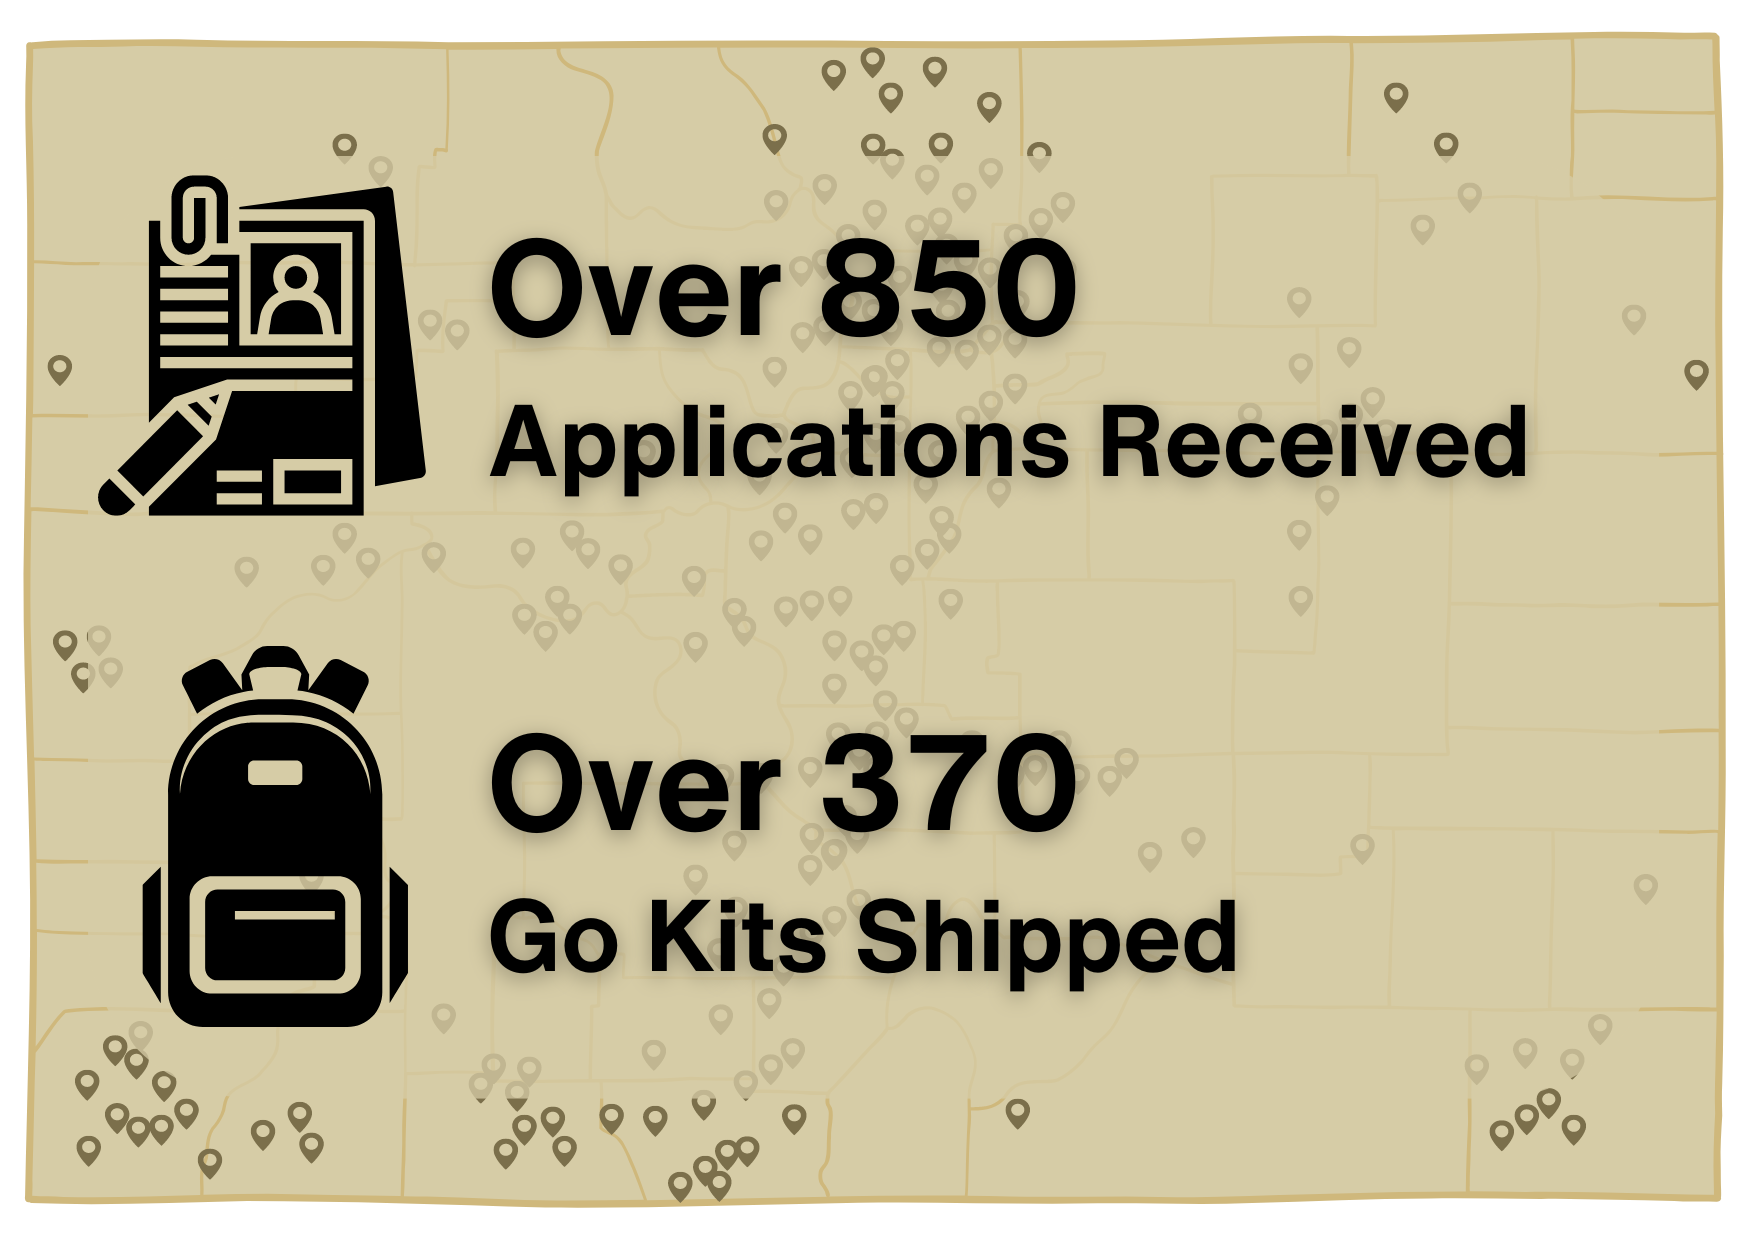 Map of Colorado - Over 850 Applications Recieved. Over 370 Go Kits Shipped. 